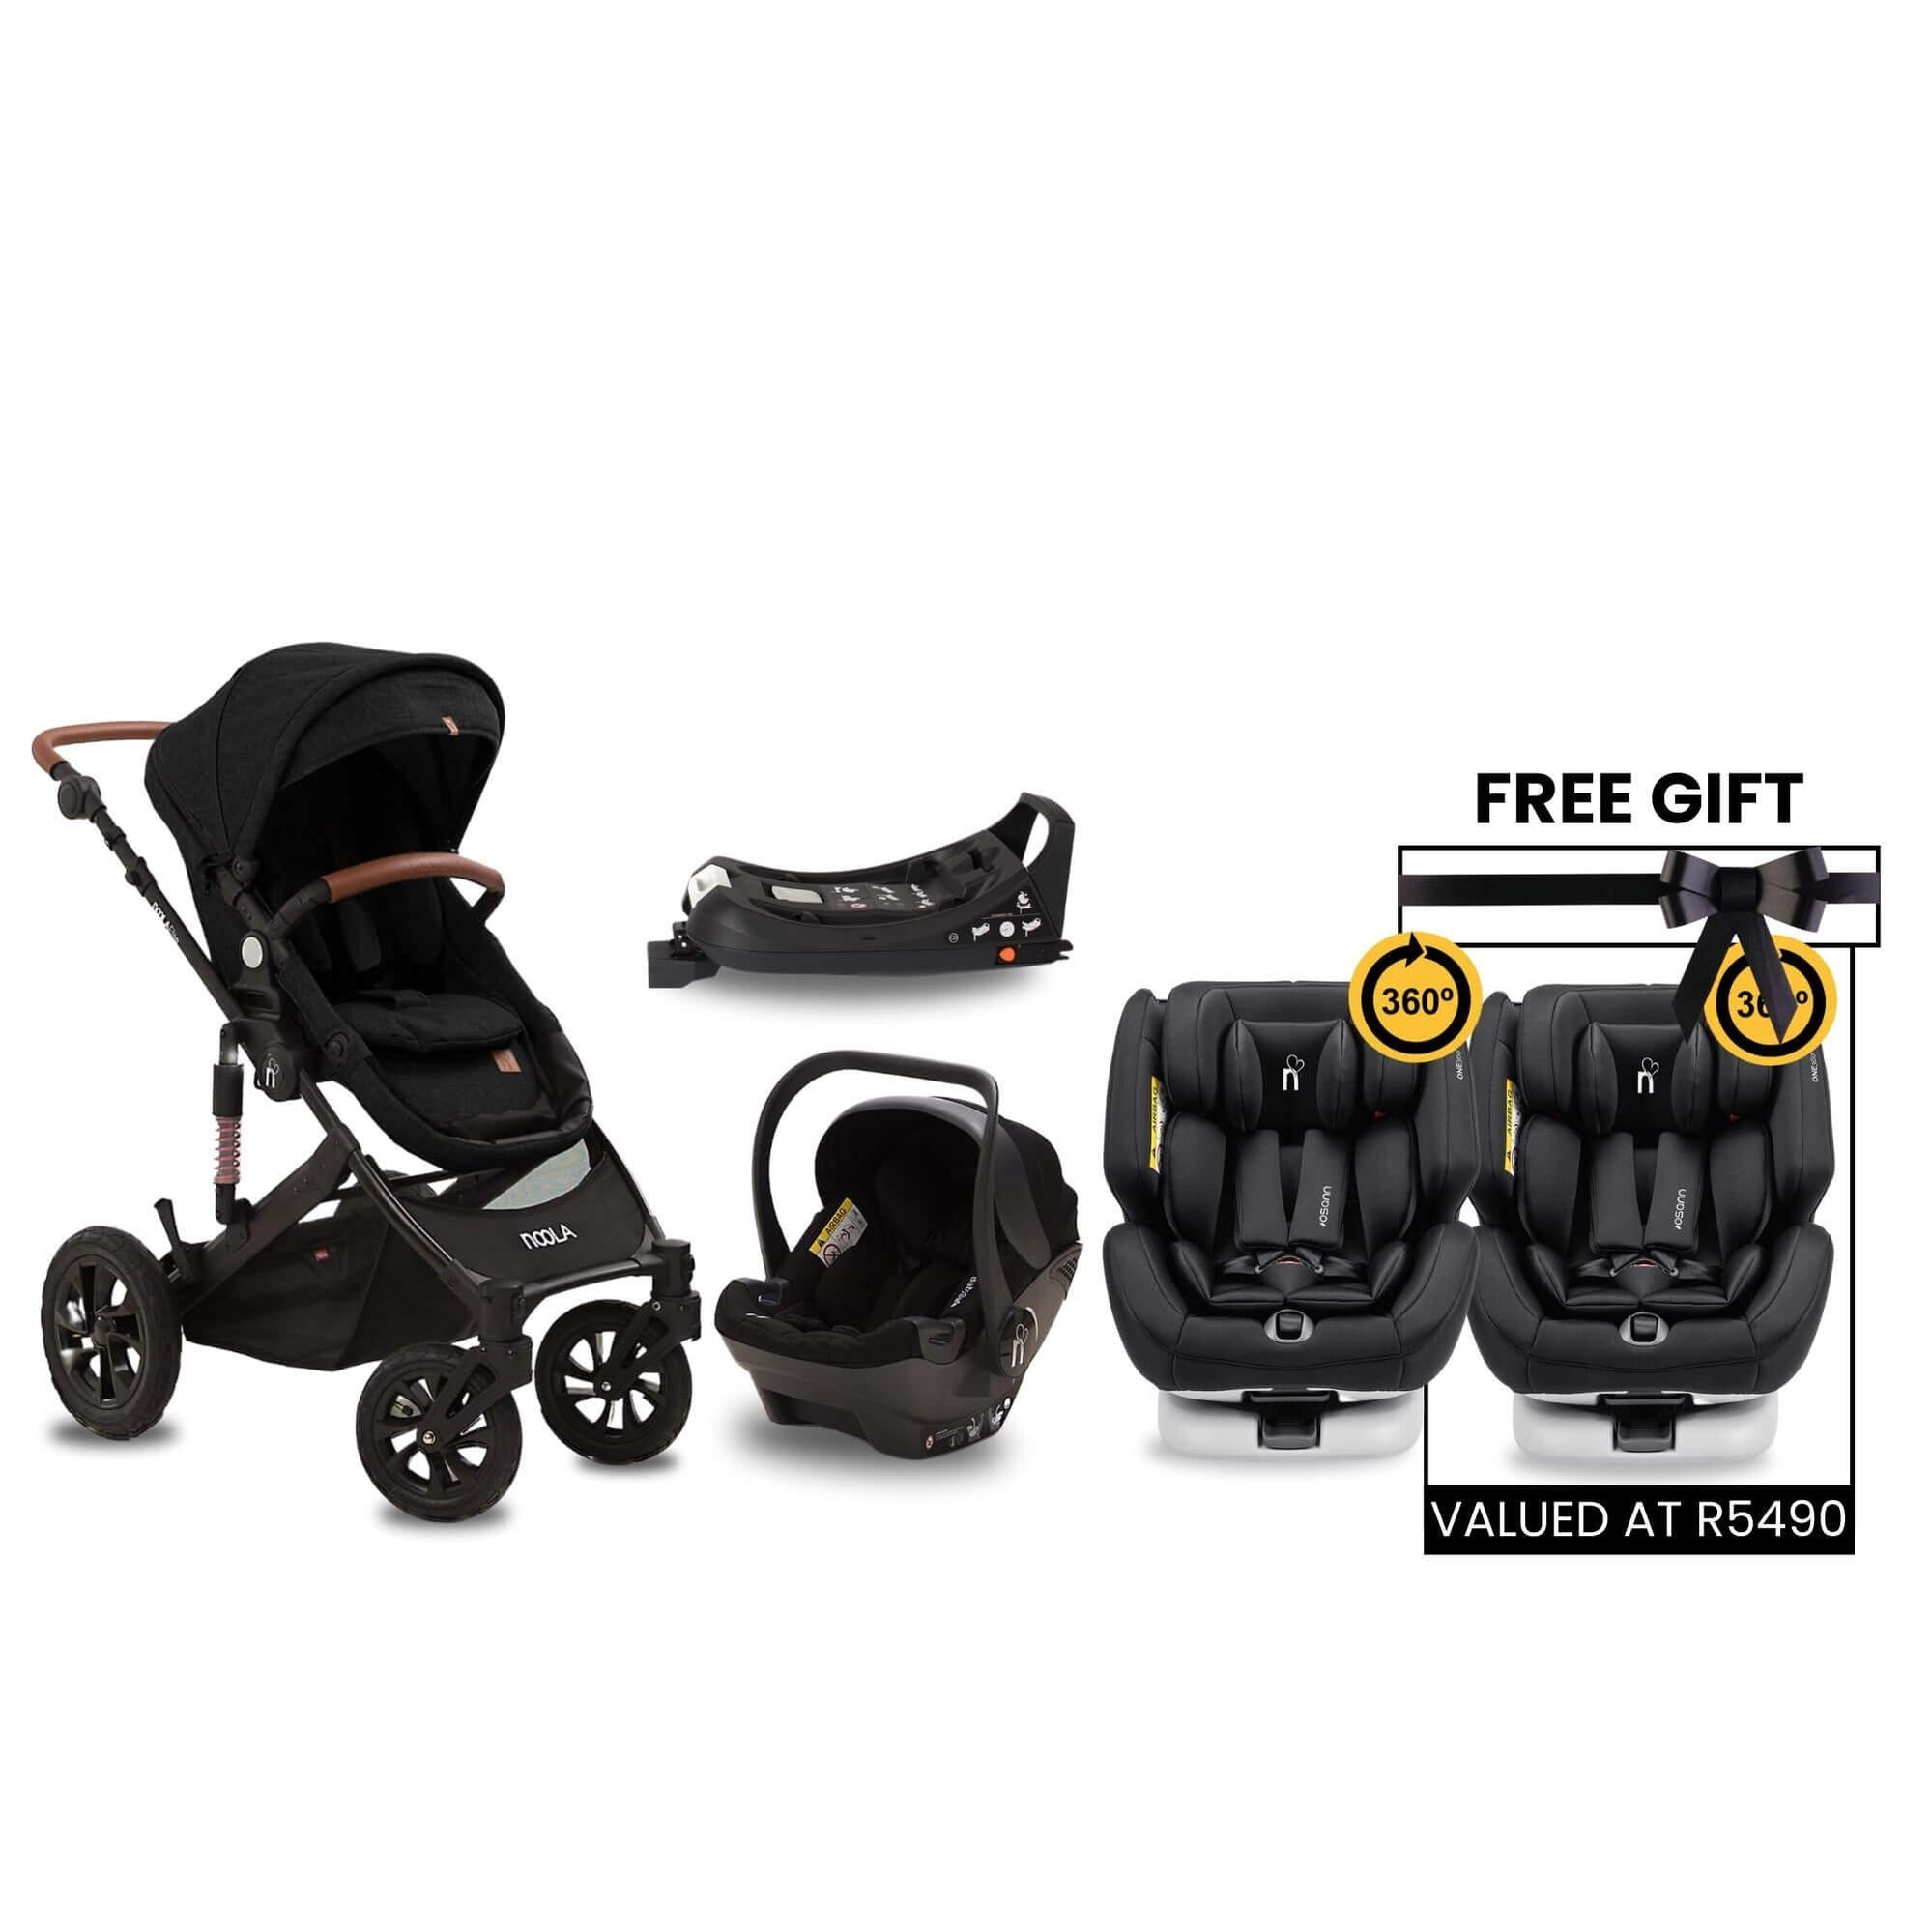 noola the elite 5in1 travel system midnight black baby stroller #SELECT THE COLOUR OF YOUR ONE360_ONE360 | MIDNIGHT BLACK